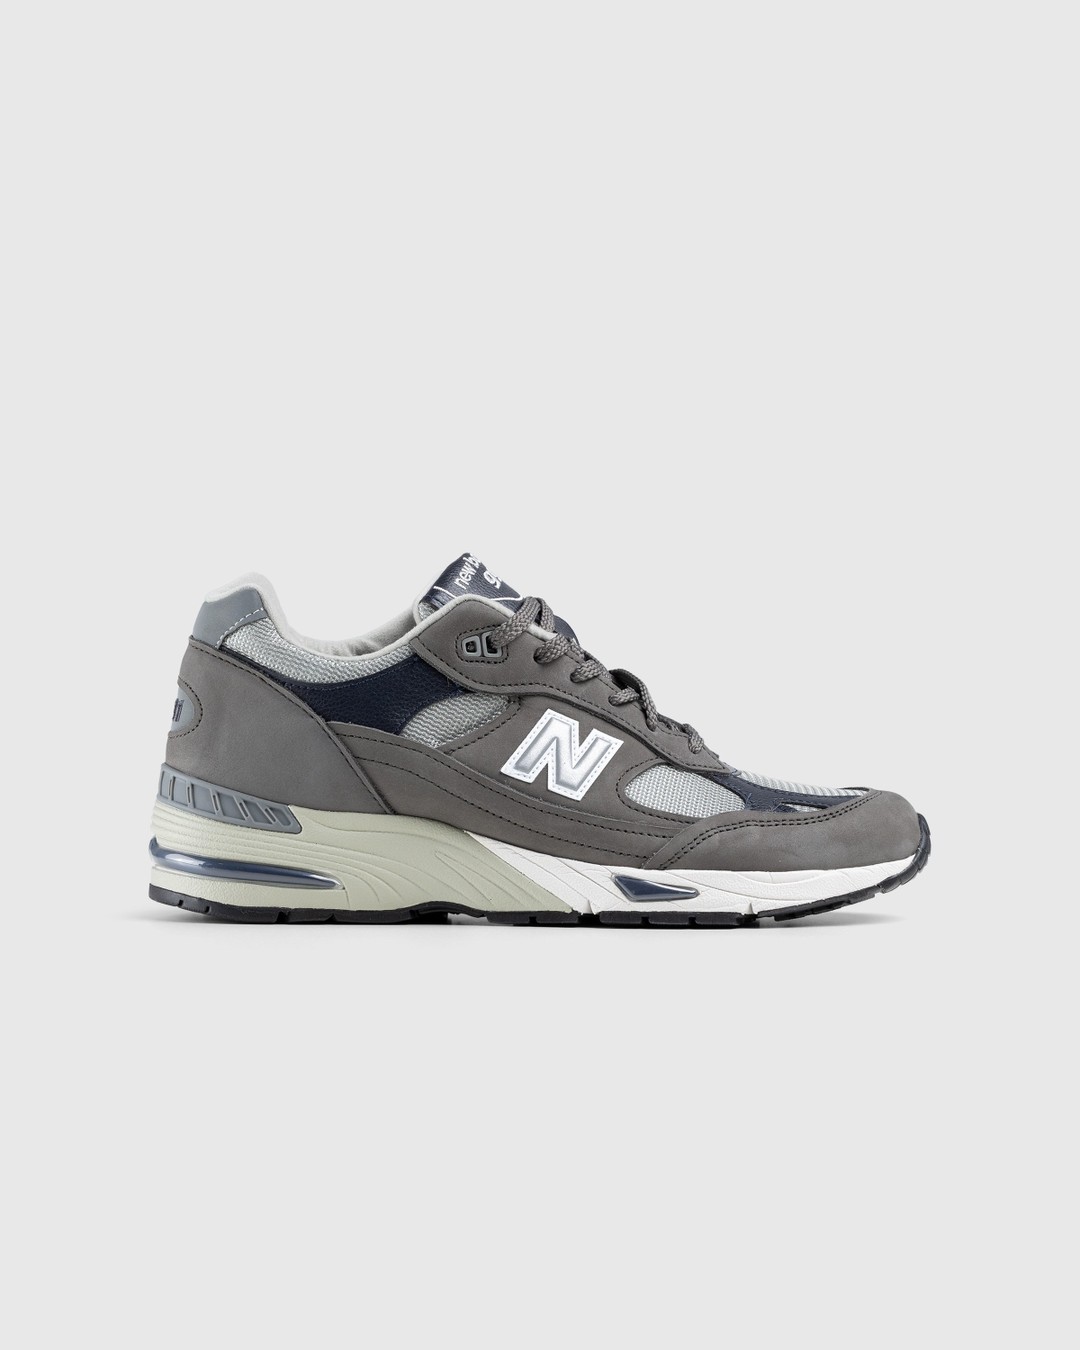 New Balance – M991GNS Grey/Navy - Low Top Sneakers - Grey - Image 1